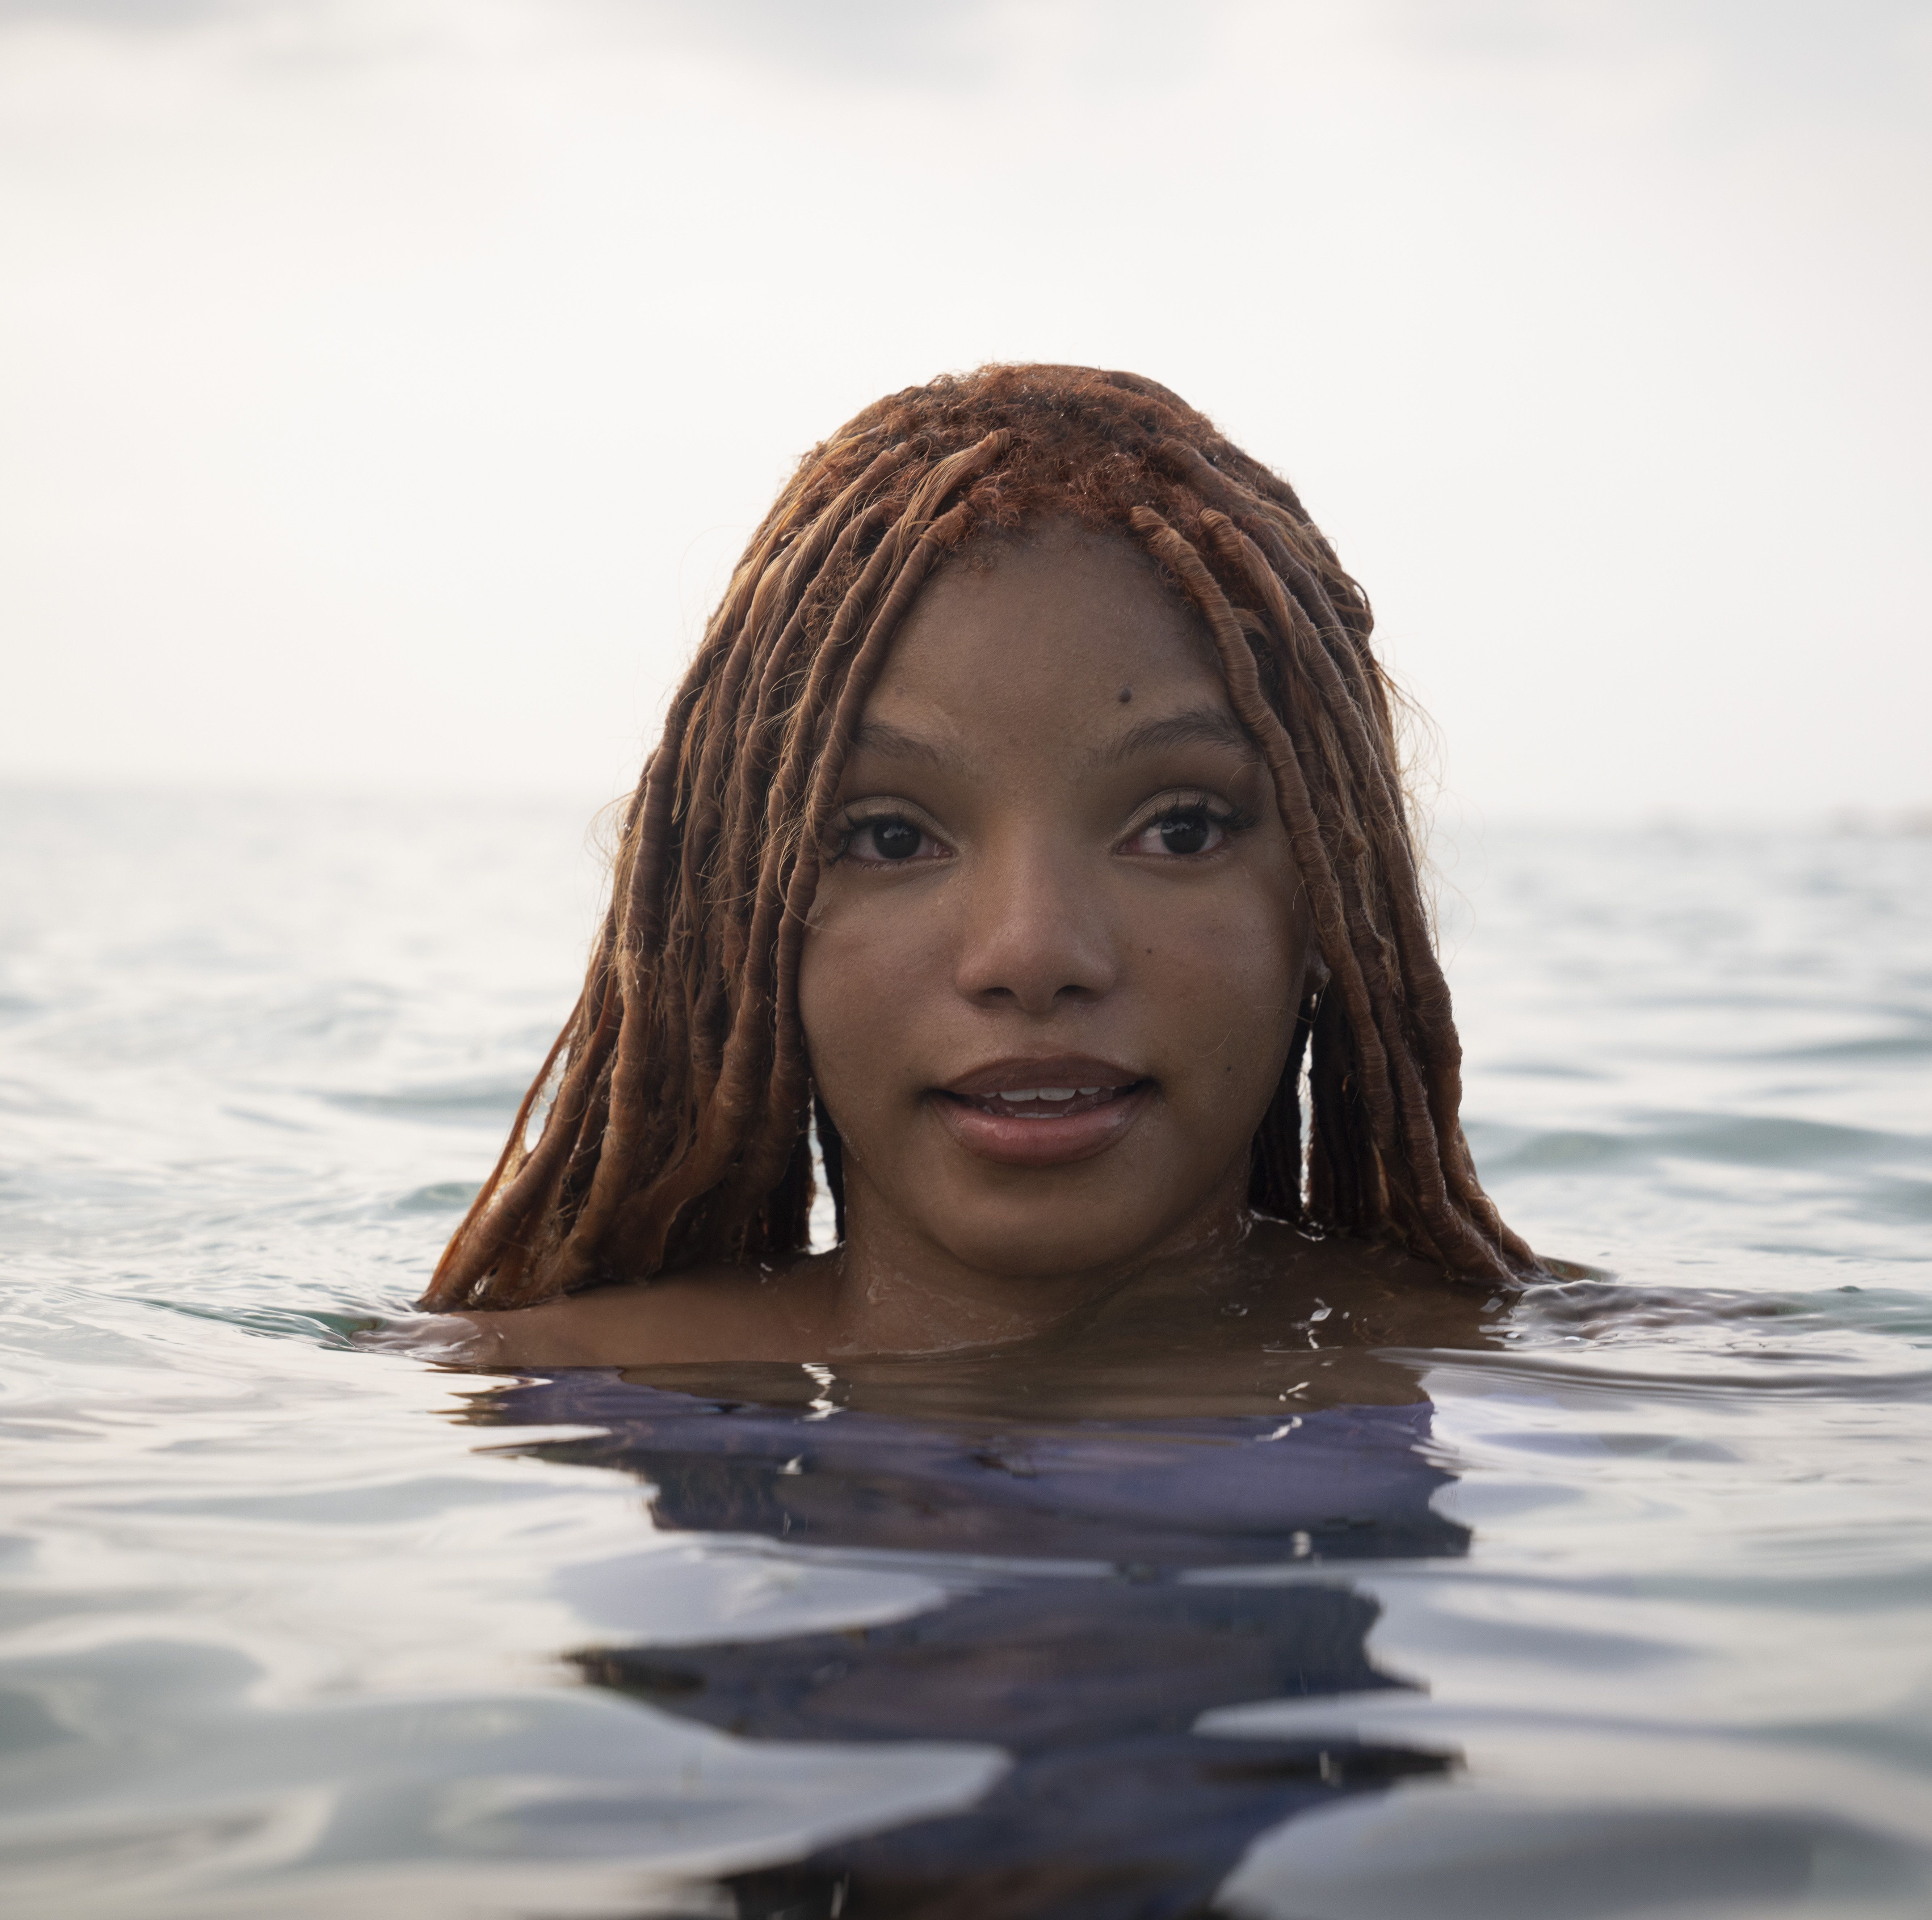 How to Watch 'The Little Mermaid' Live-Action Remake Starring Halle Bailey